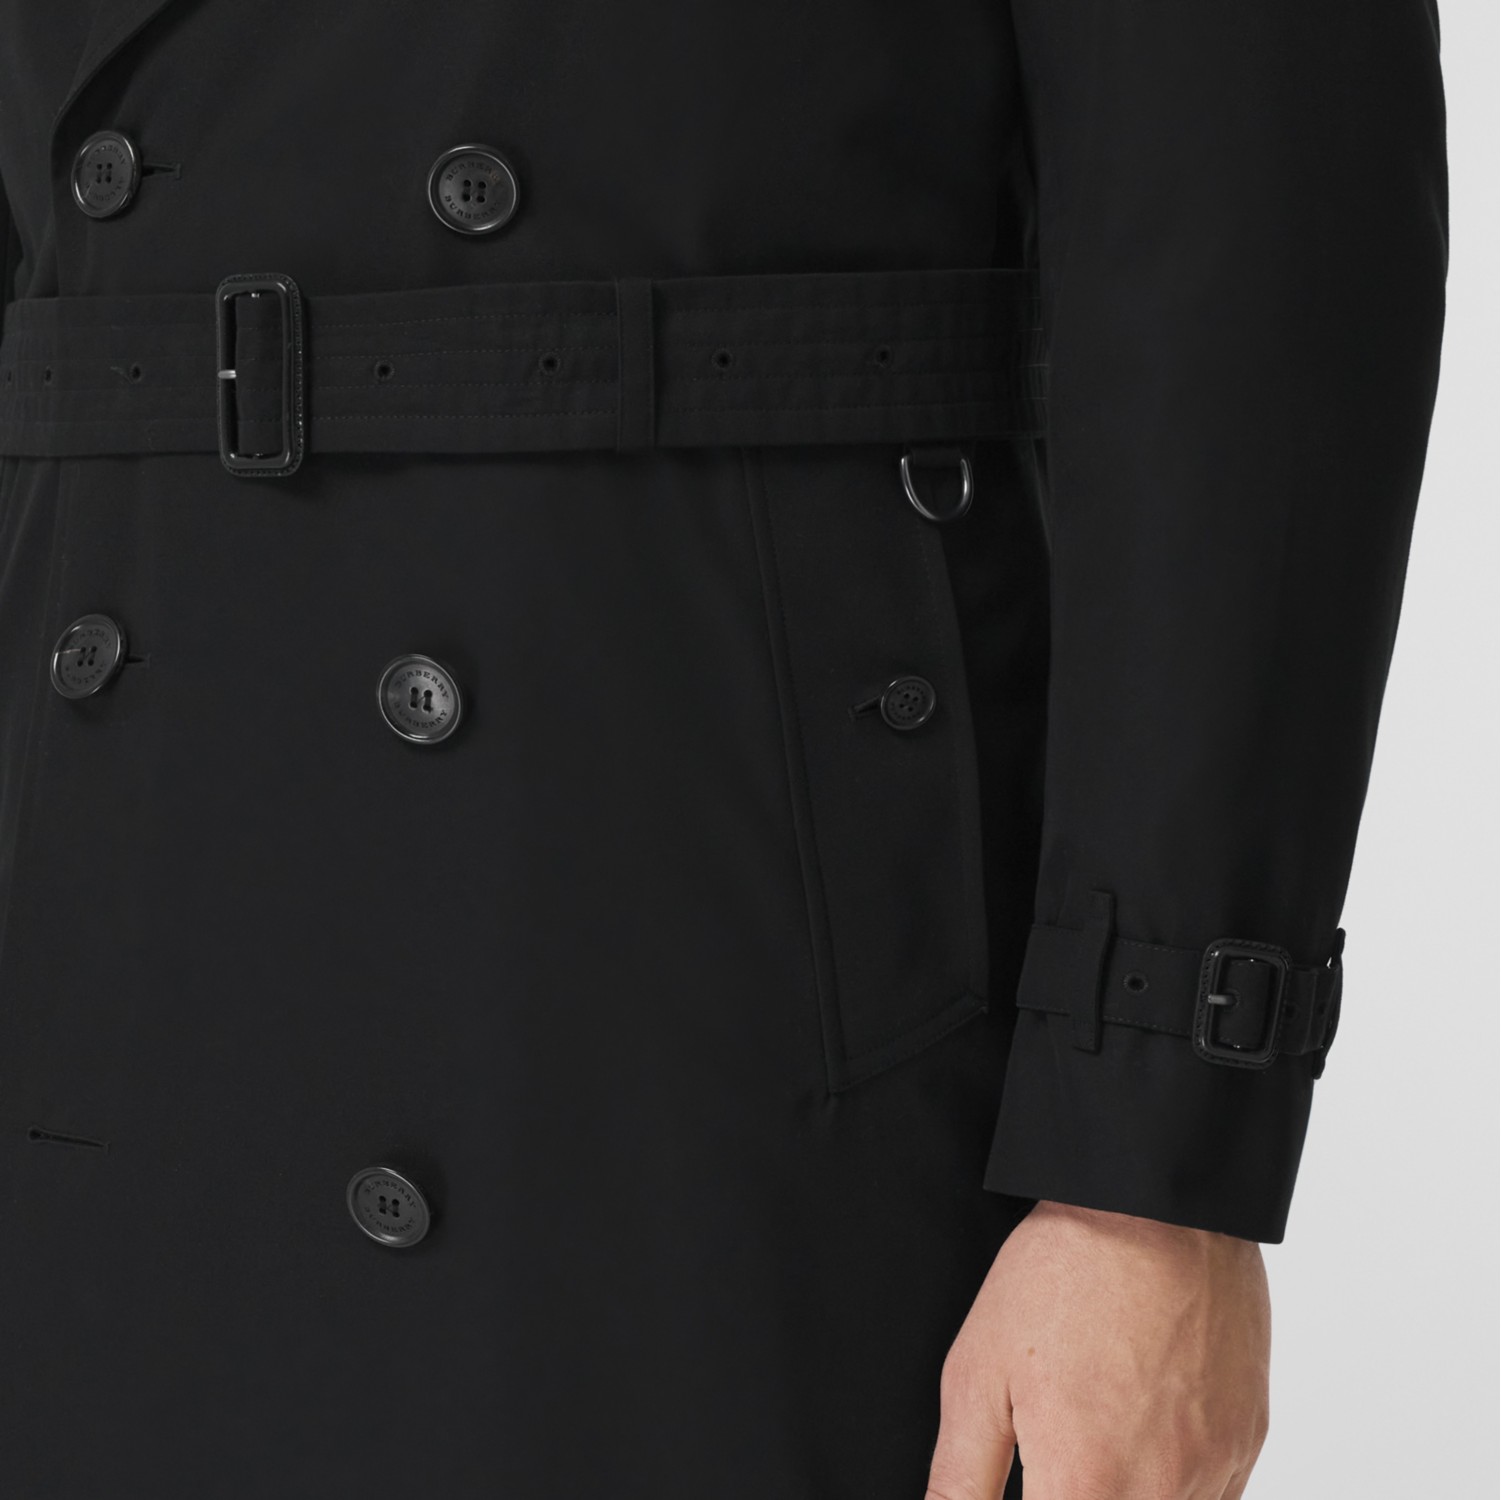 The Long Heritage Trench Coat in - | Official